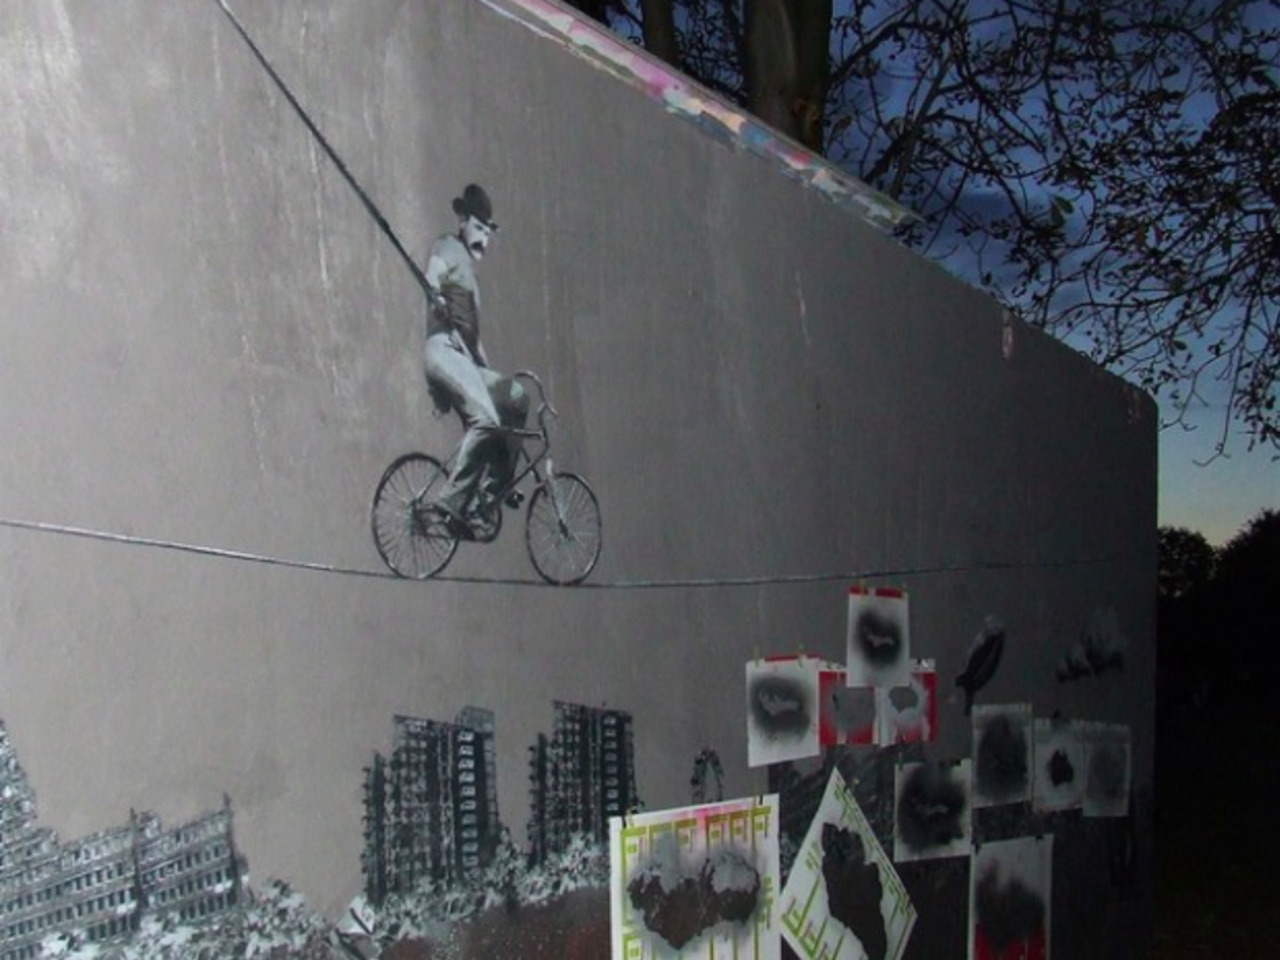 #Streetart by Tim Young #Germany #art 
http://designcollector.net/have-a-nice-grey/ http://t.co/7FpYiUs2cn